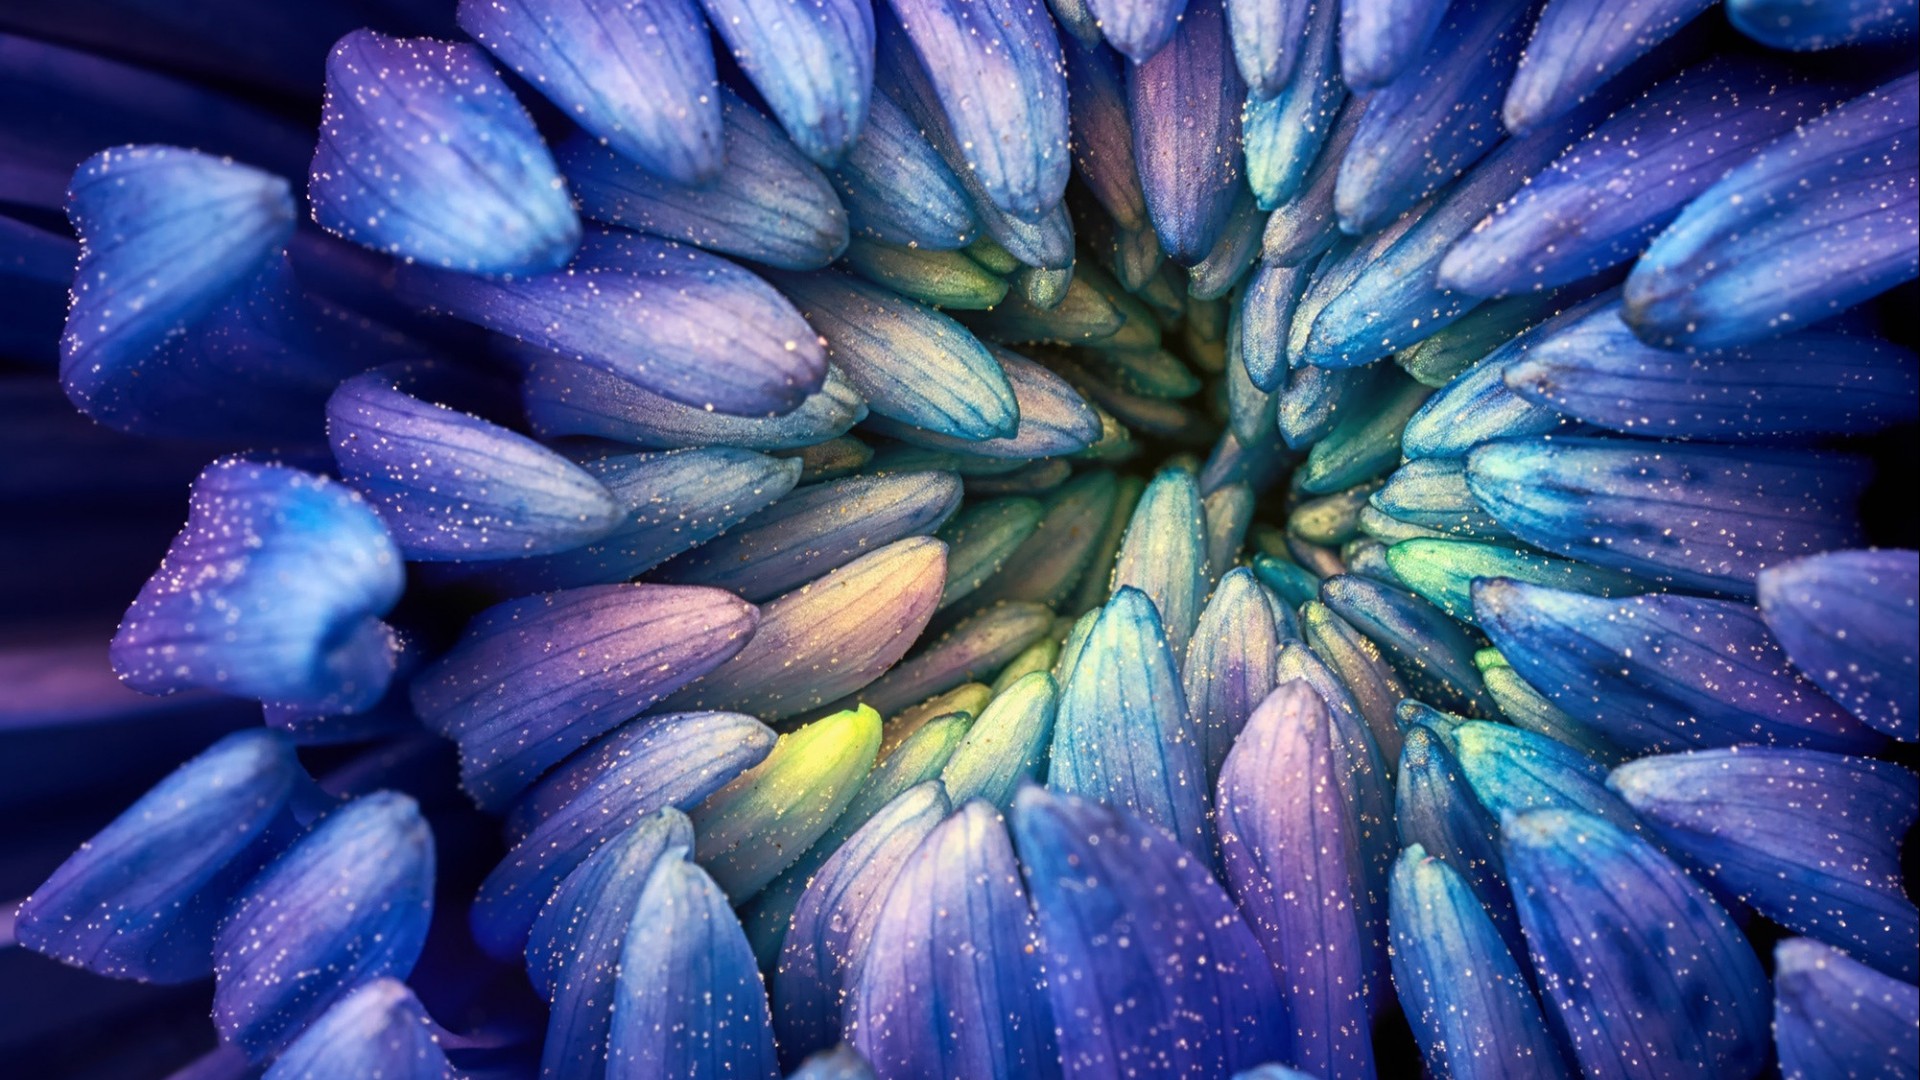 Abstract Colorful Photography Flowers Macro Petals Pollen Blue 1920x1080